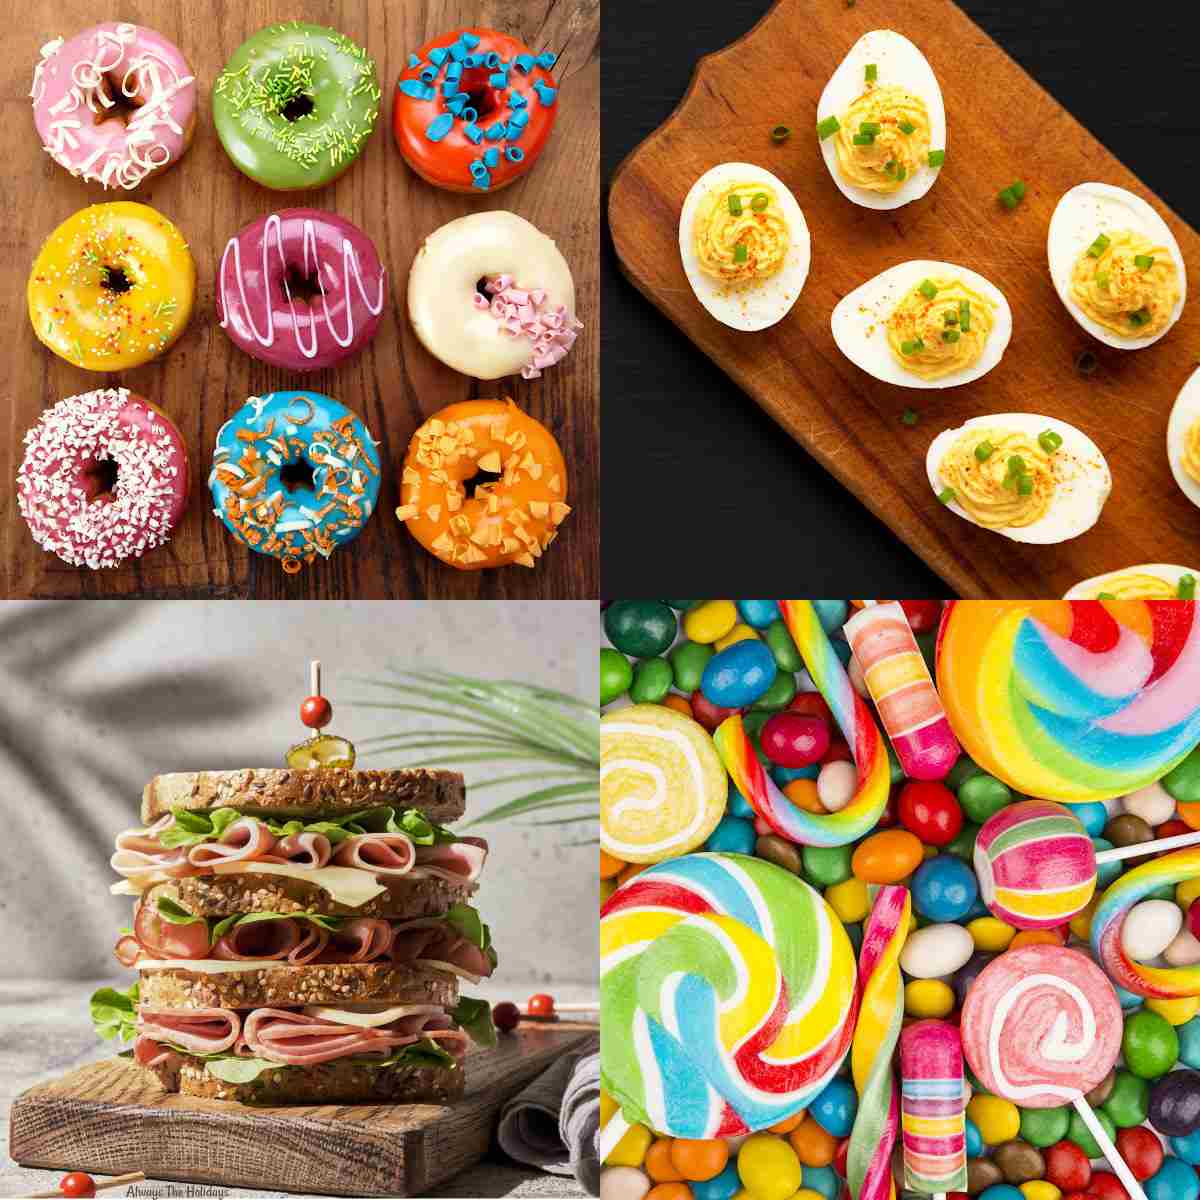 A square with four November national food days featured in it including National Doughnut Day in the top left corner, National Deviled Egg Day in the top right corner, National Sandwich Day in the bottom left corner and National Candy Day in the bottom right corner.